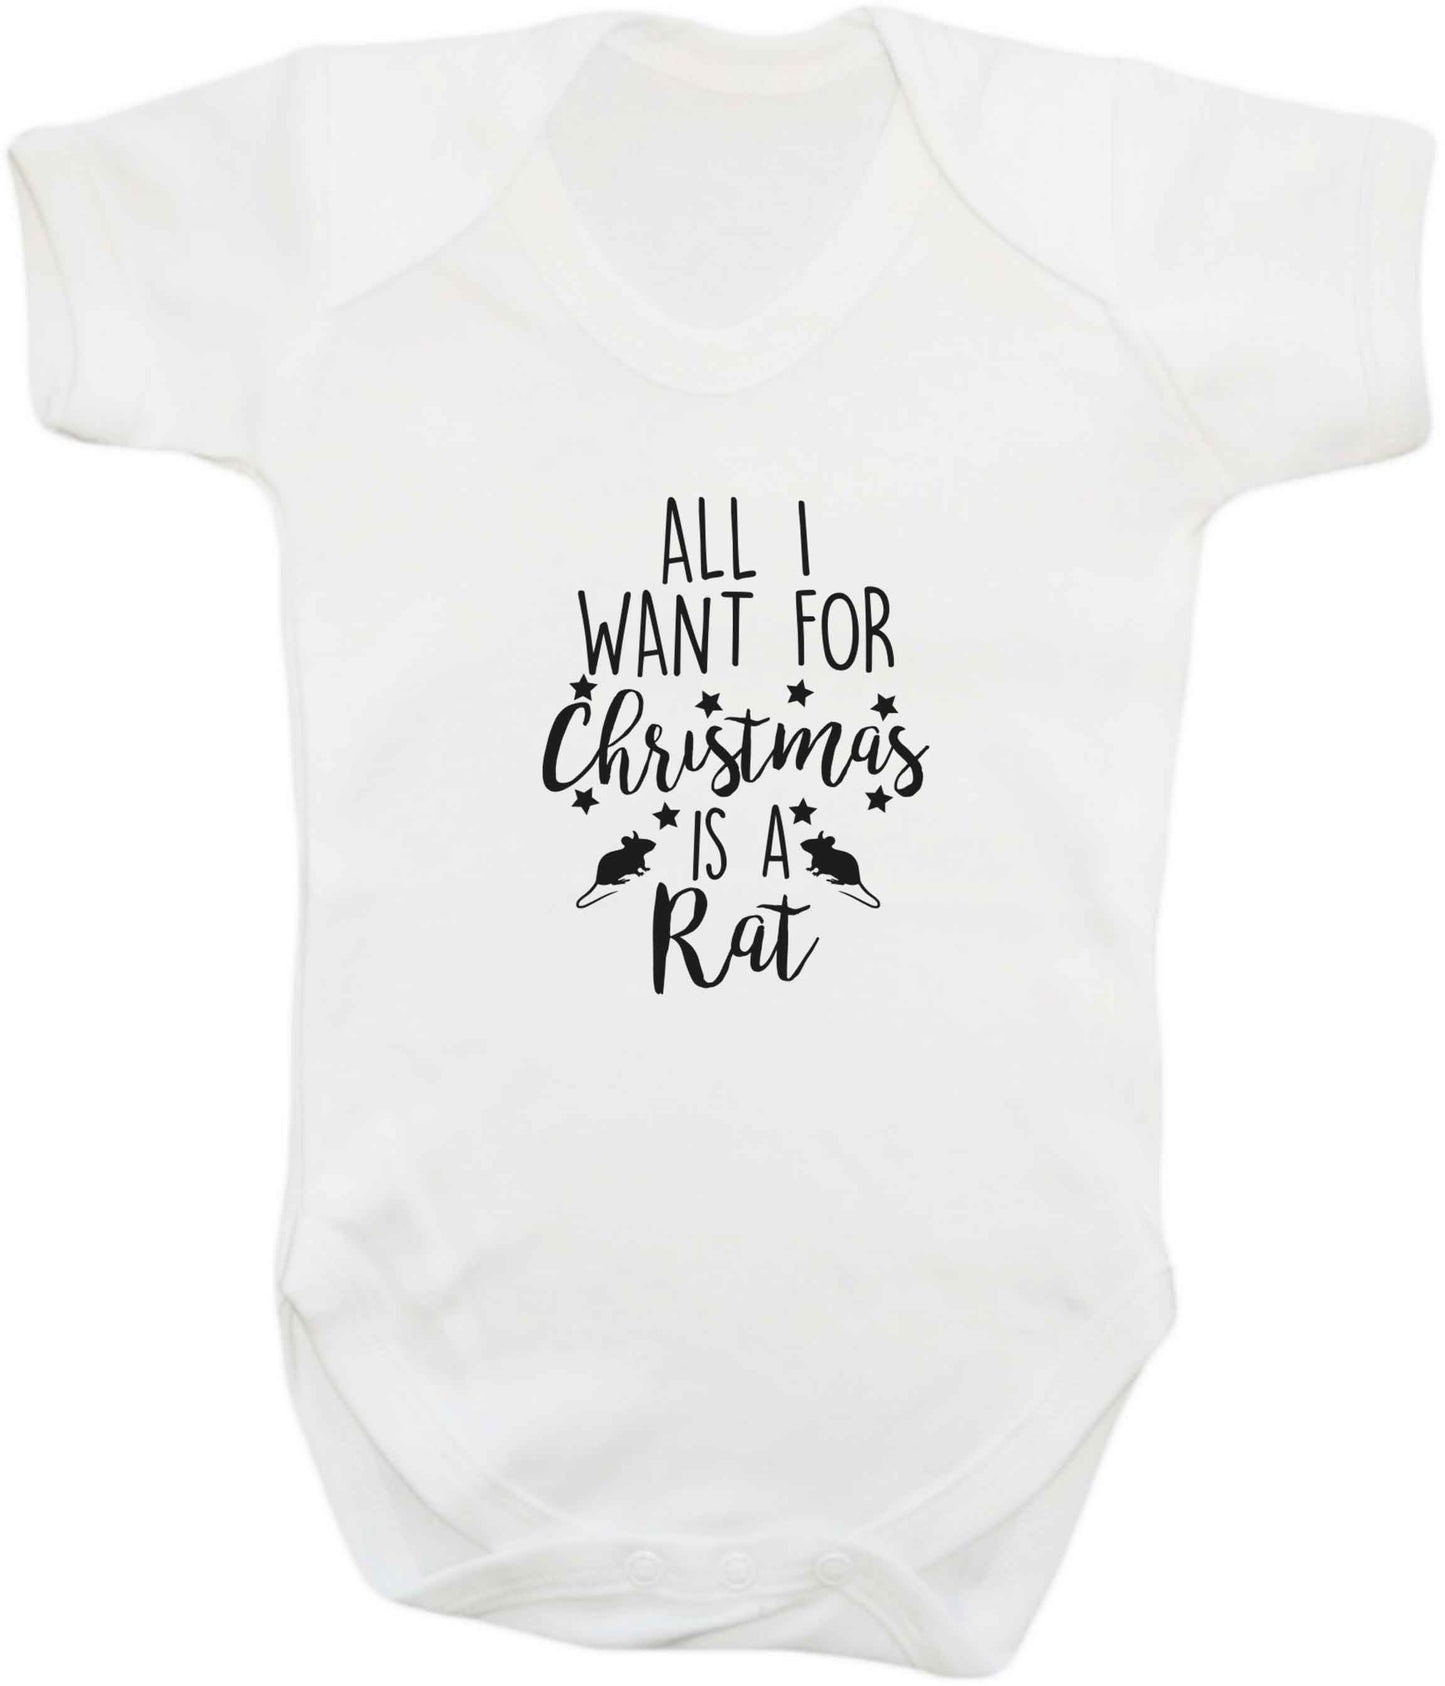 All I want for Christmas is a rat baby vest white 18-24 months